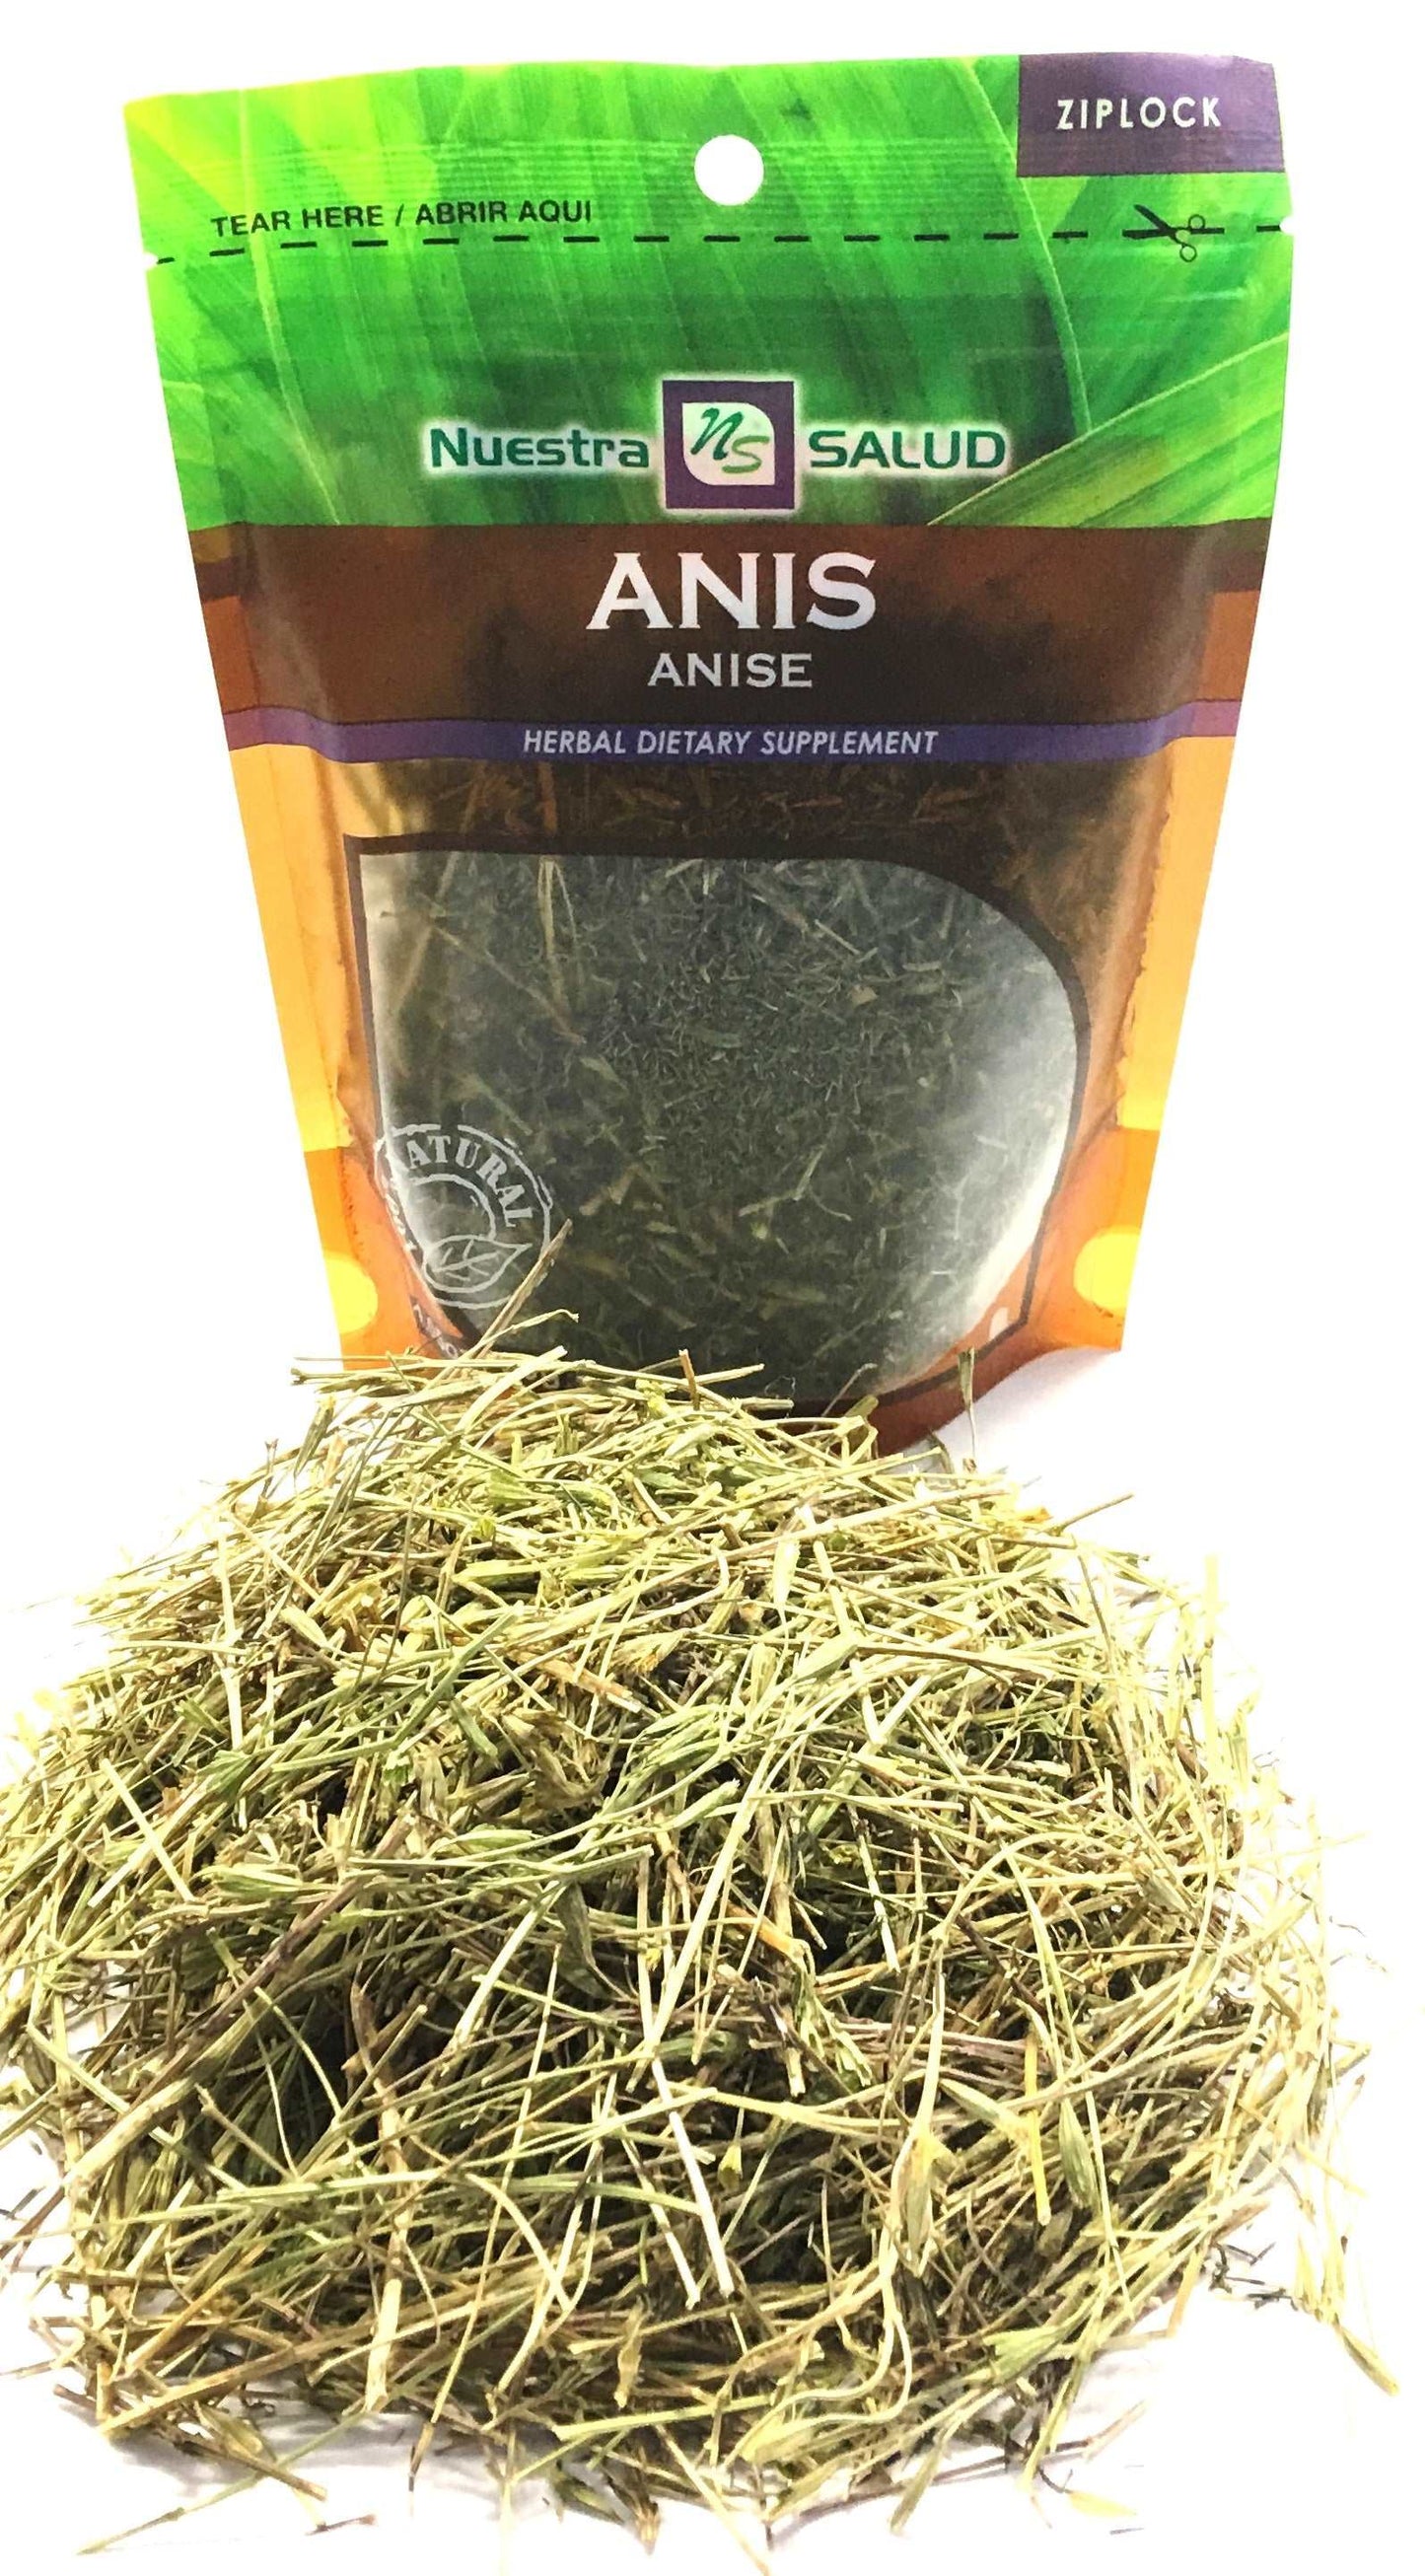  Anise Loose Herbal Infusion Tea Anis Value Pack (90g) by Nuestra Salud sold by NS Herbs Co.